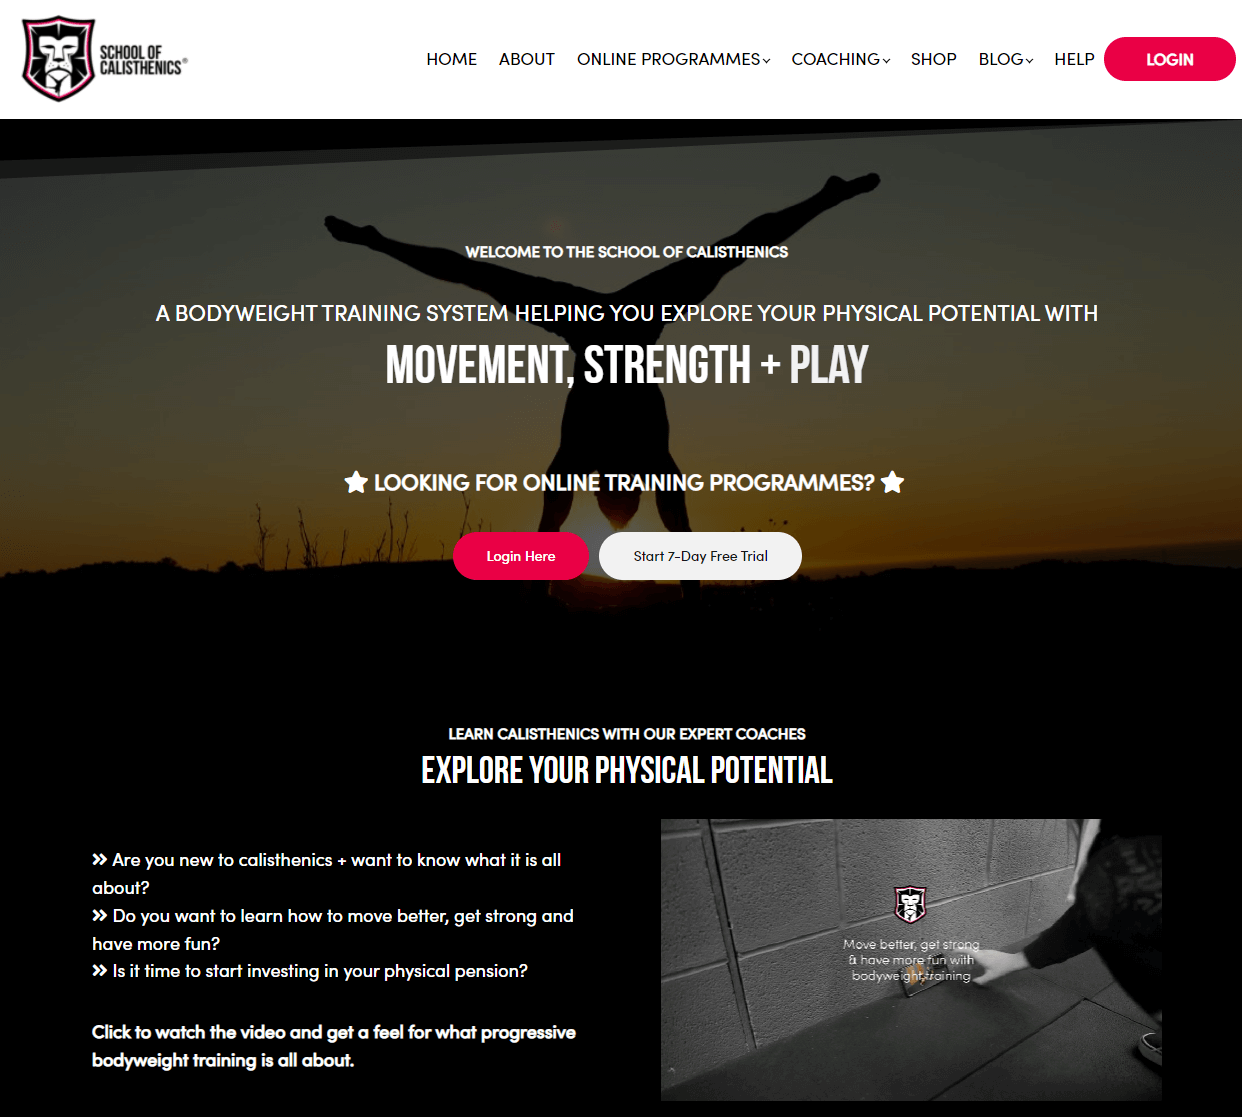 The home page of the School of Calisthenics.